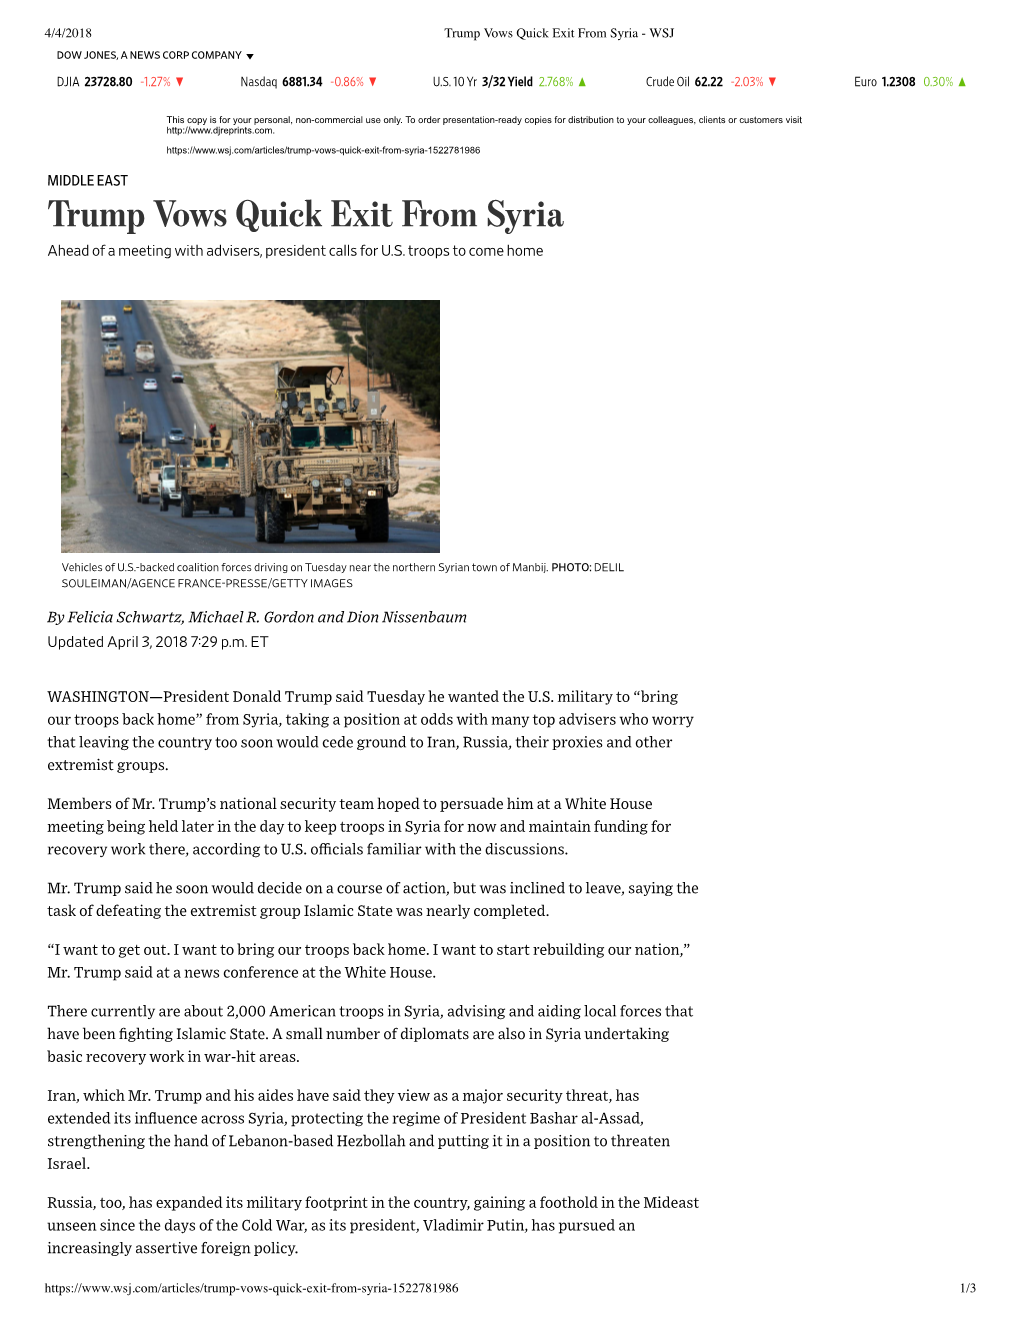 Trump Vows Quick Exit from Syria - WSJ DOW JONES, a NEWS CORP COMPANY